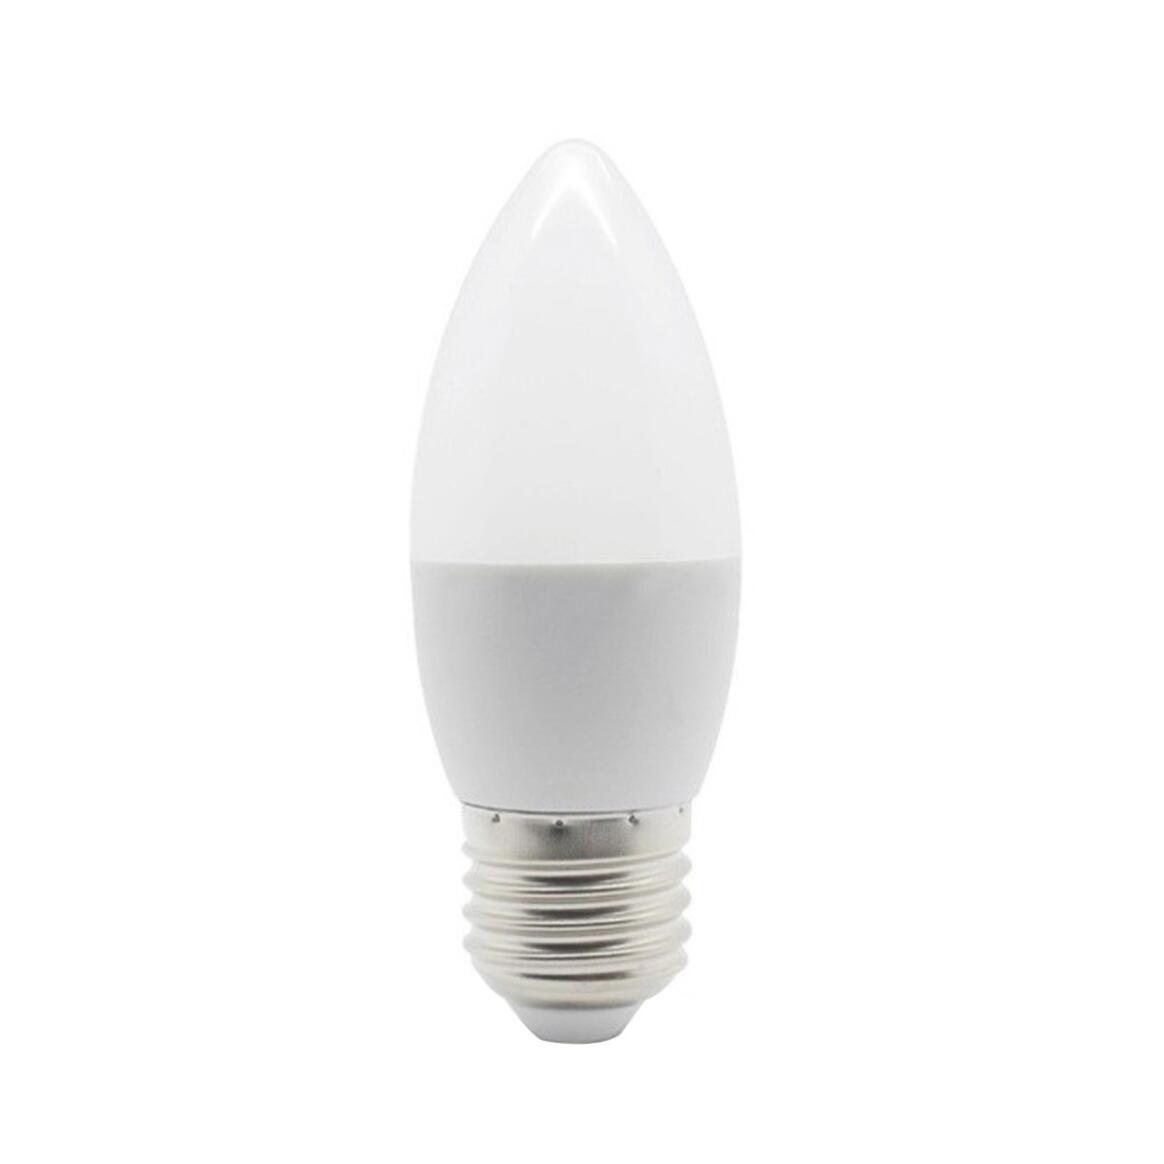 LED Candle Bulb Warm White Dimmable E27 5W 2700k 470lm 10cm main product image